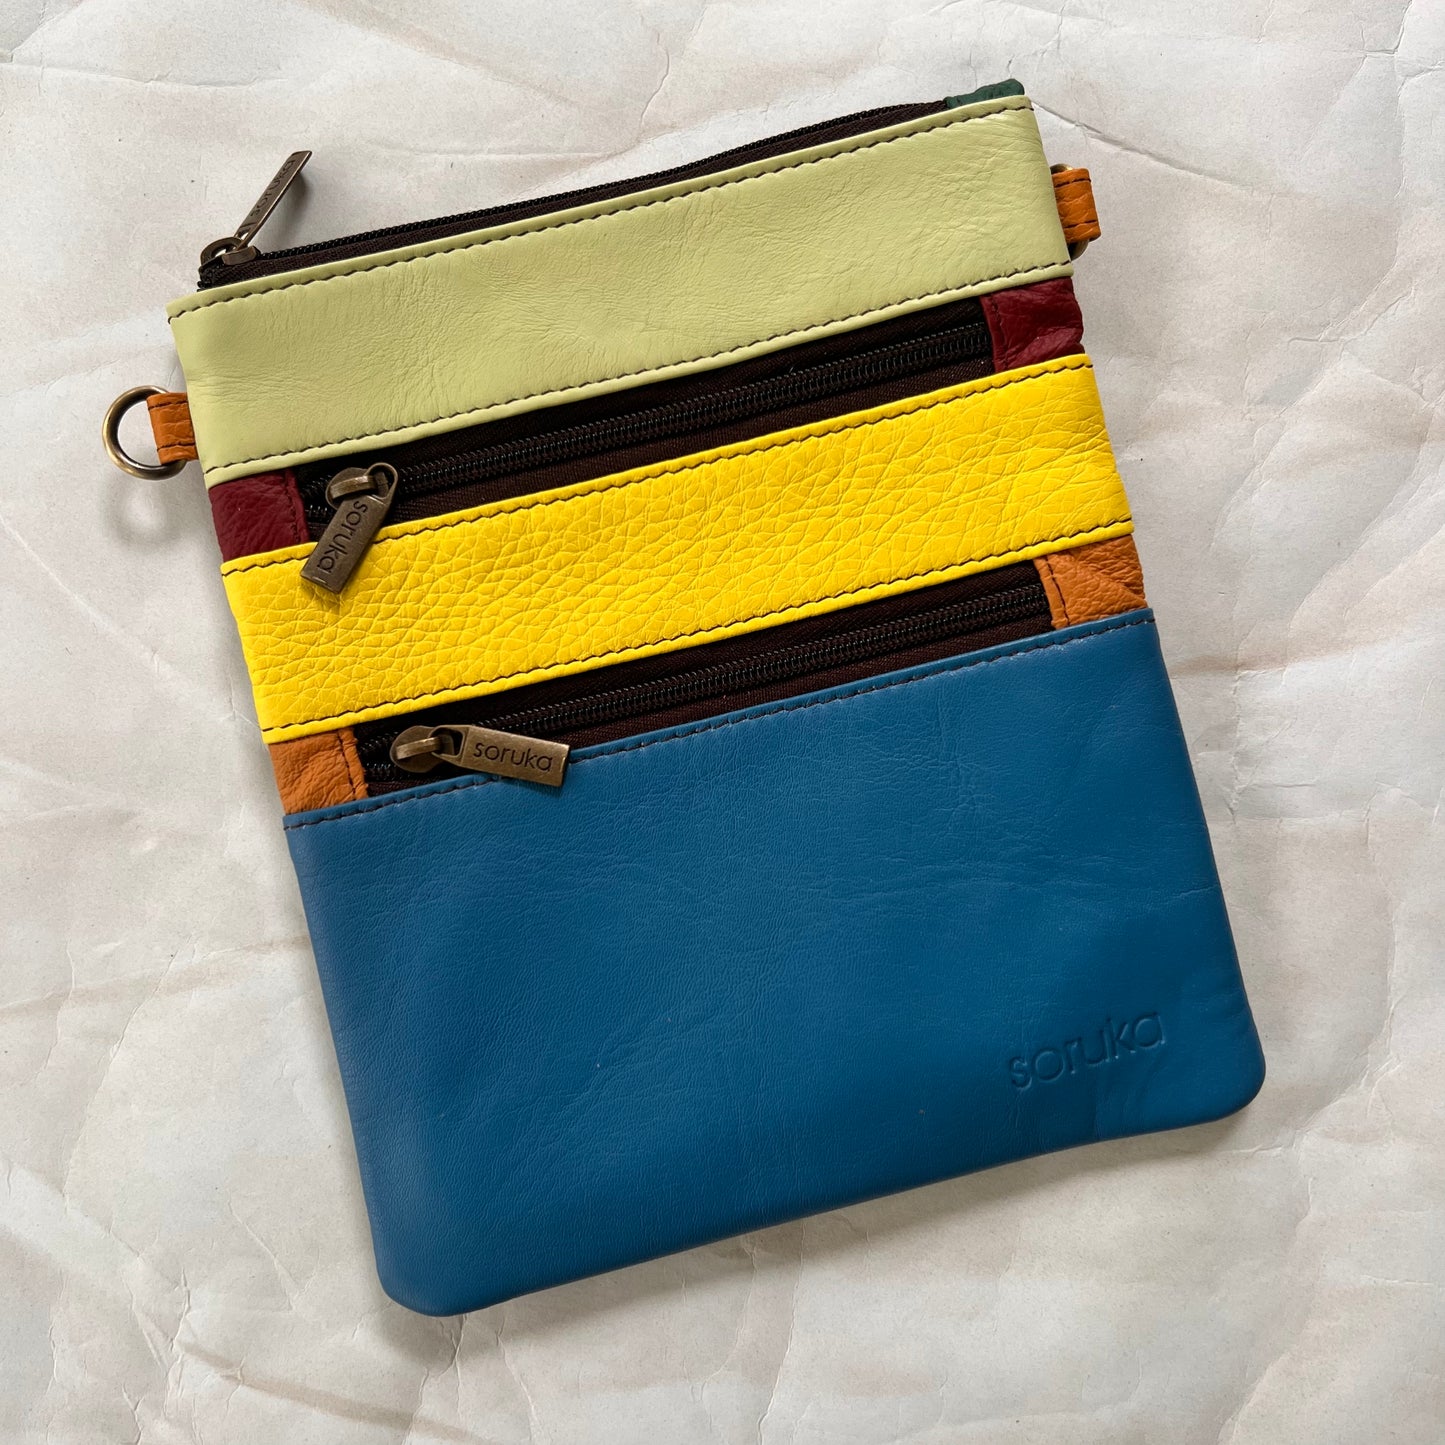 flat rectangular maya bag with top zipper and 2 zipper pockets color blocked in blue, yellow, and light green.